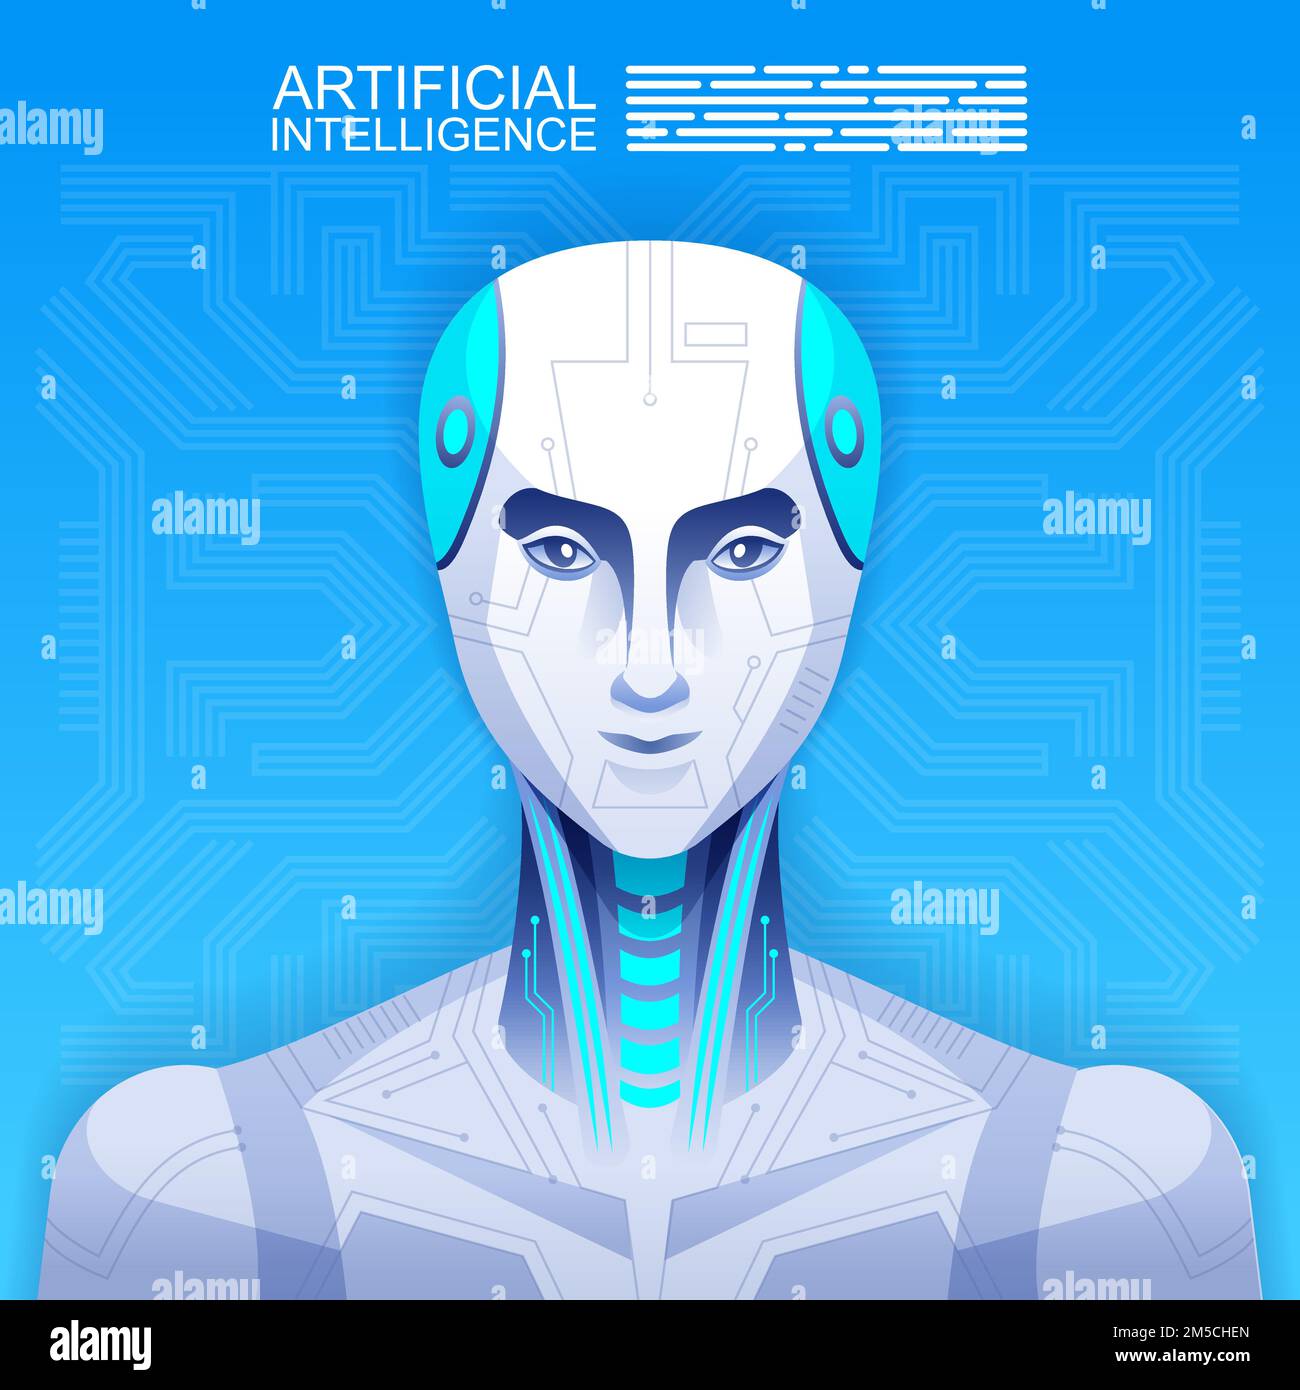 Android, Robot, Artificial intelligence concept. Vector illustration Stock Vector